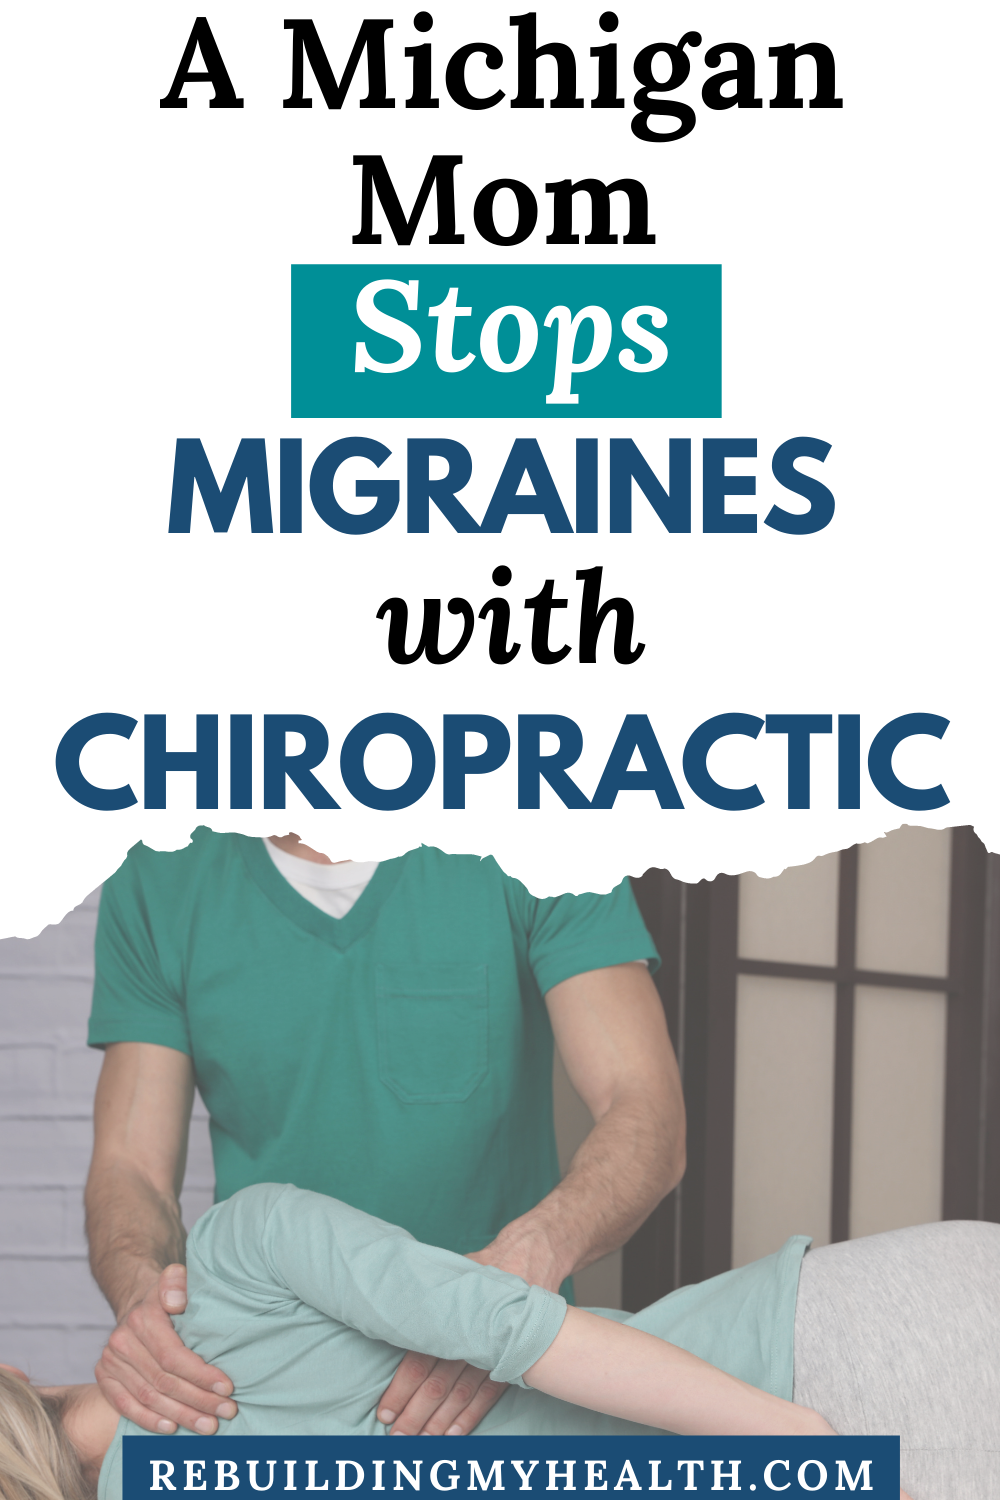 A Michigan mom finally finds relief from daily migraines with regular chiropractic adjustments and cervical spine decompression